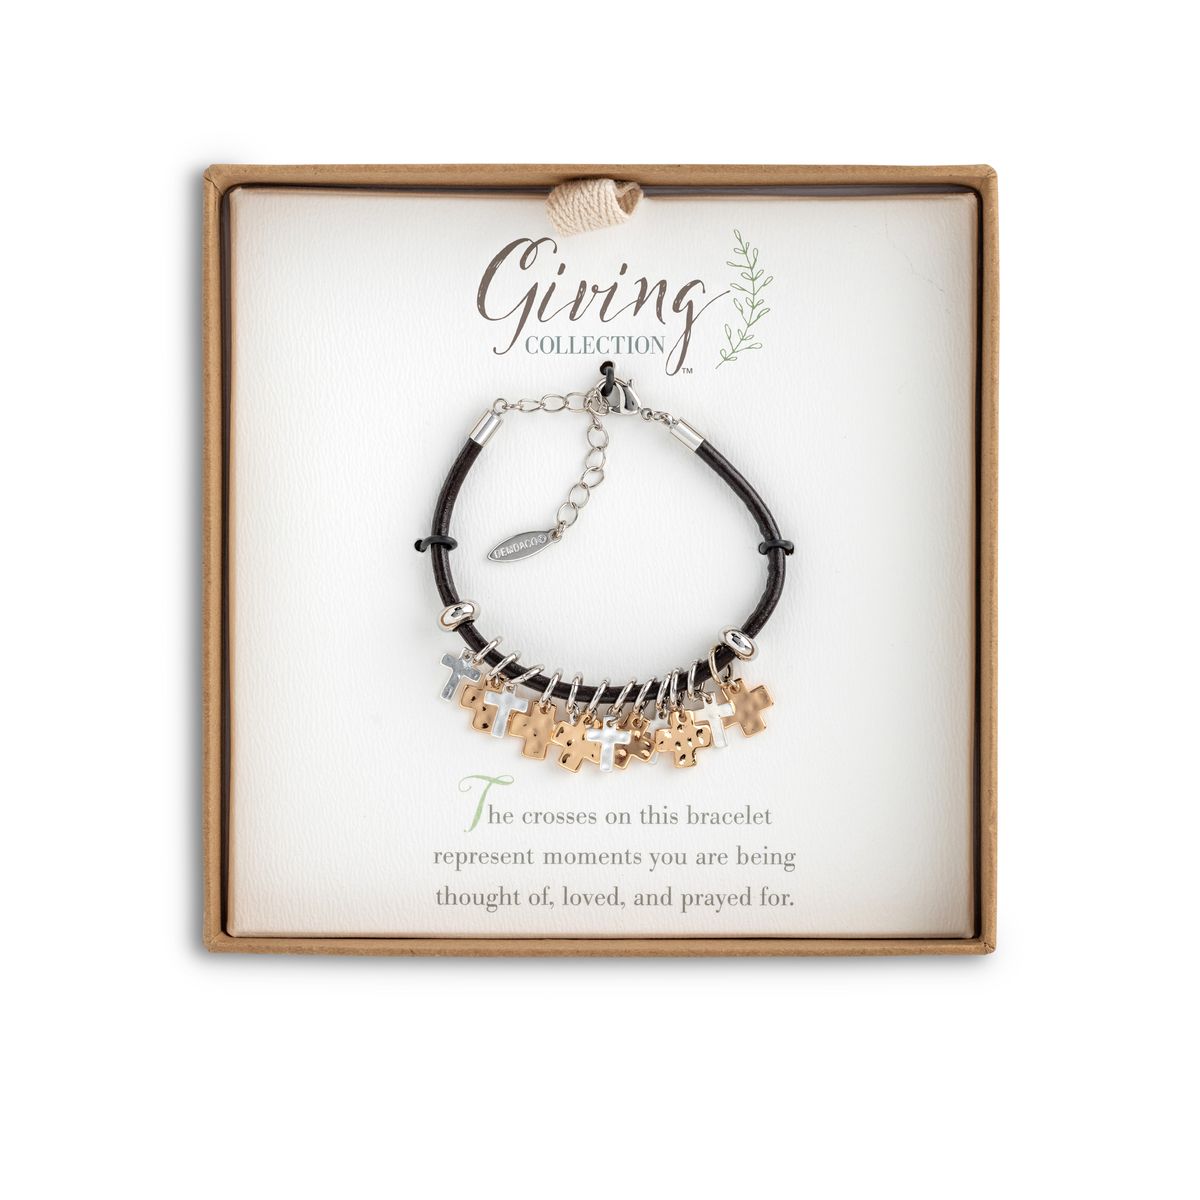 the giving collection cross bracelet